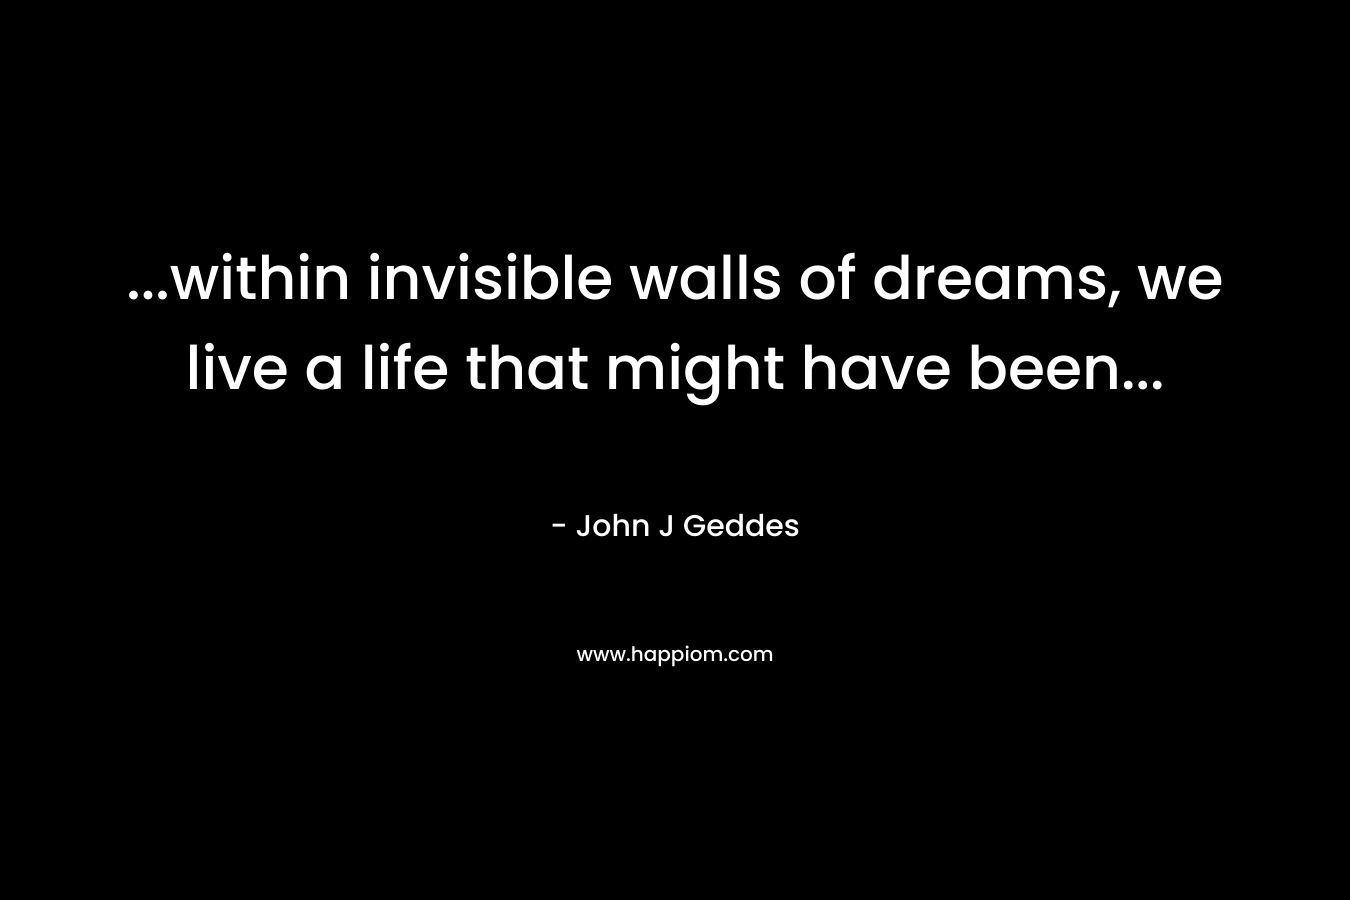 ...within invisible walls of dreams, we live a life that might have been...